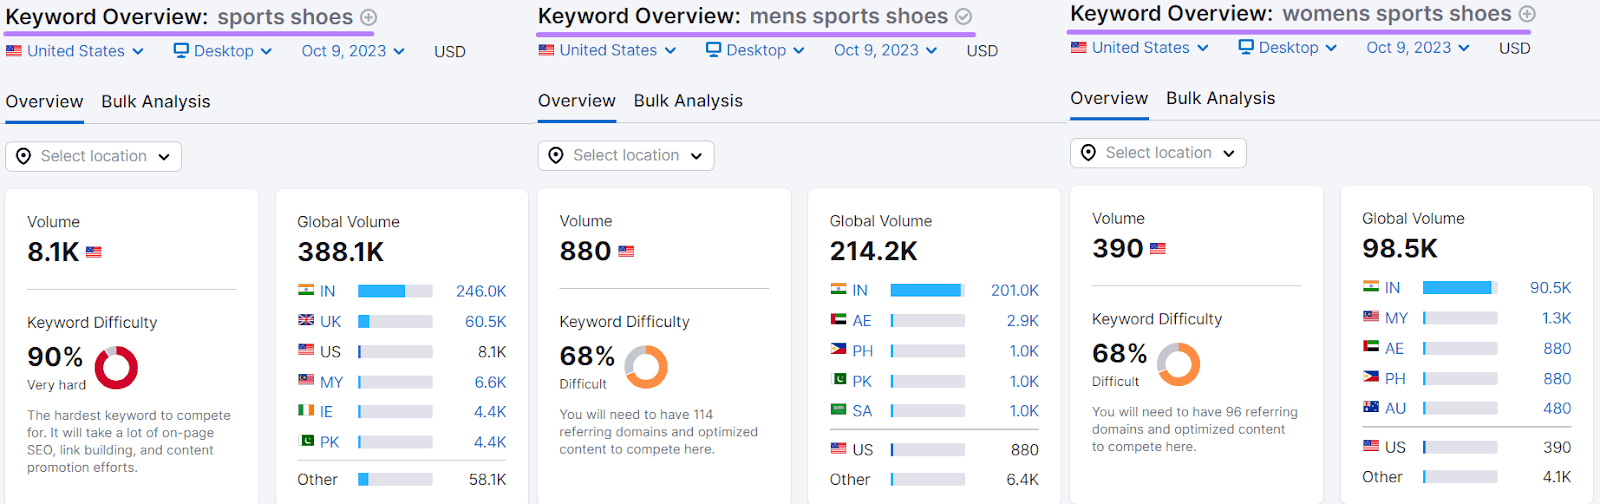 “sports shoes,” “mens sports shoes,” and “womens sports shoes” keyword overview